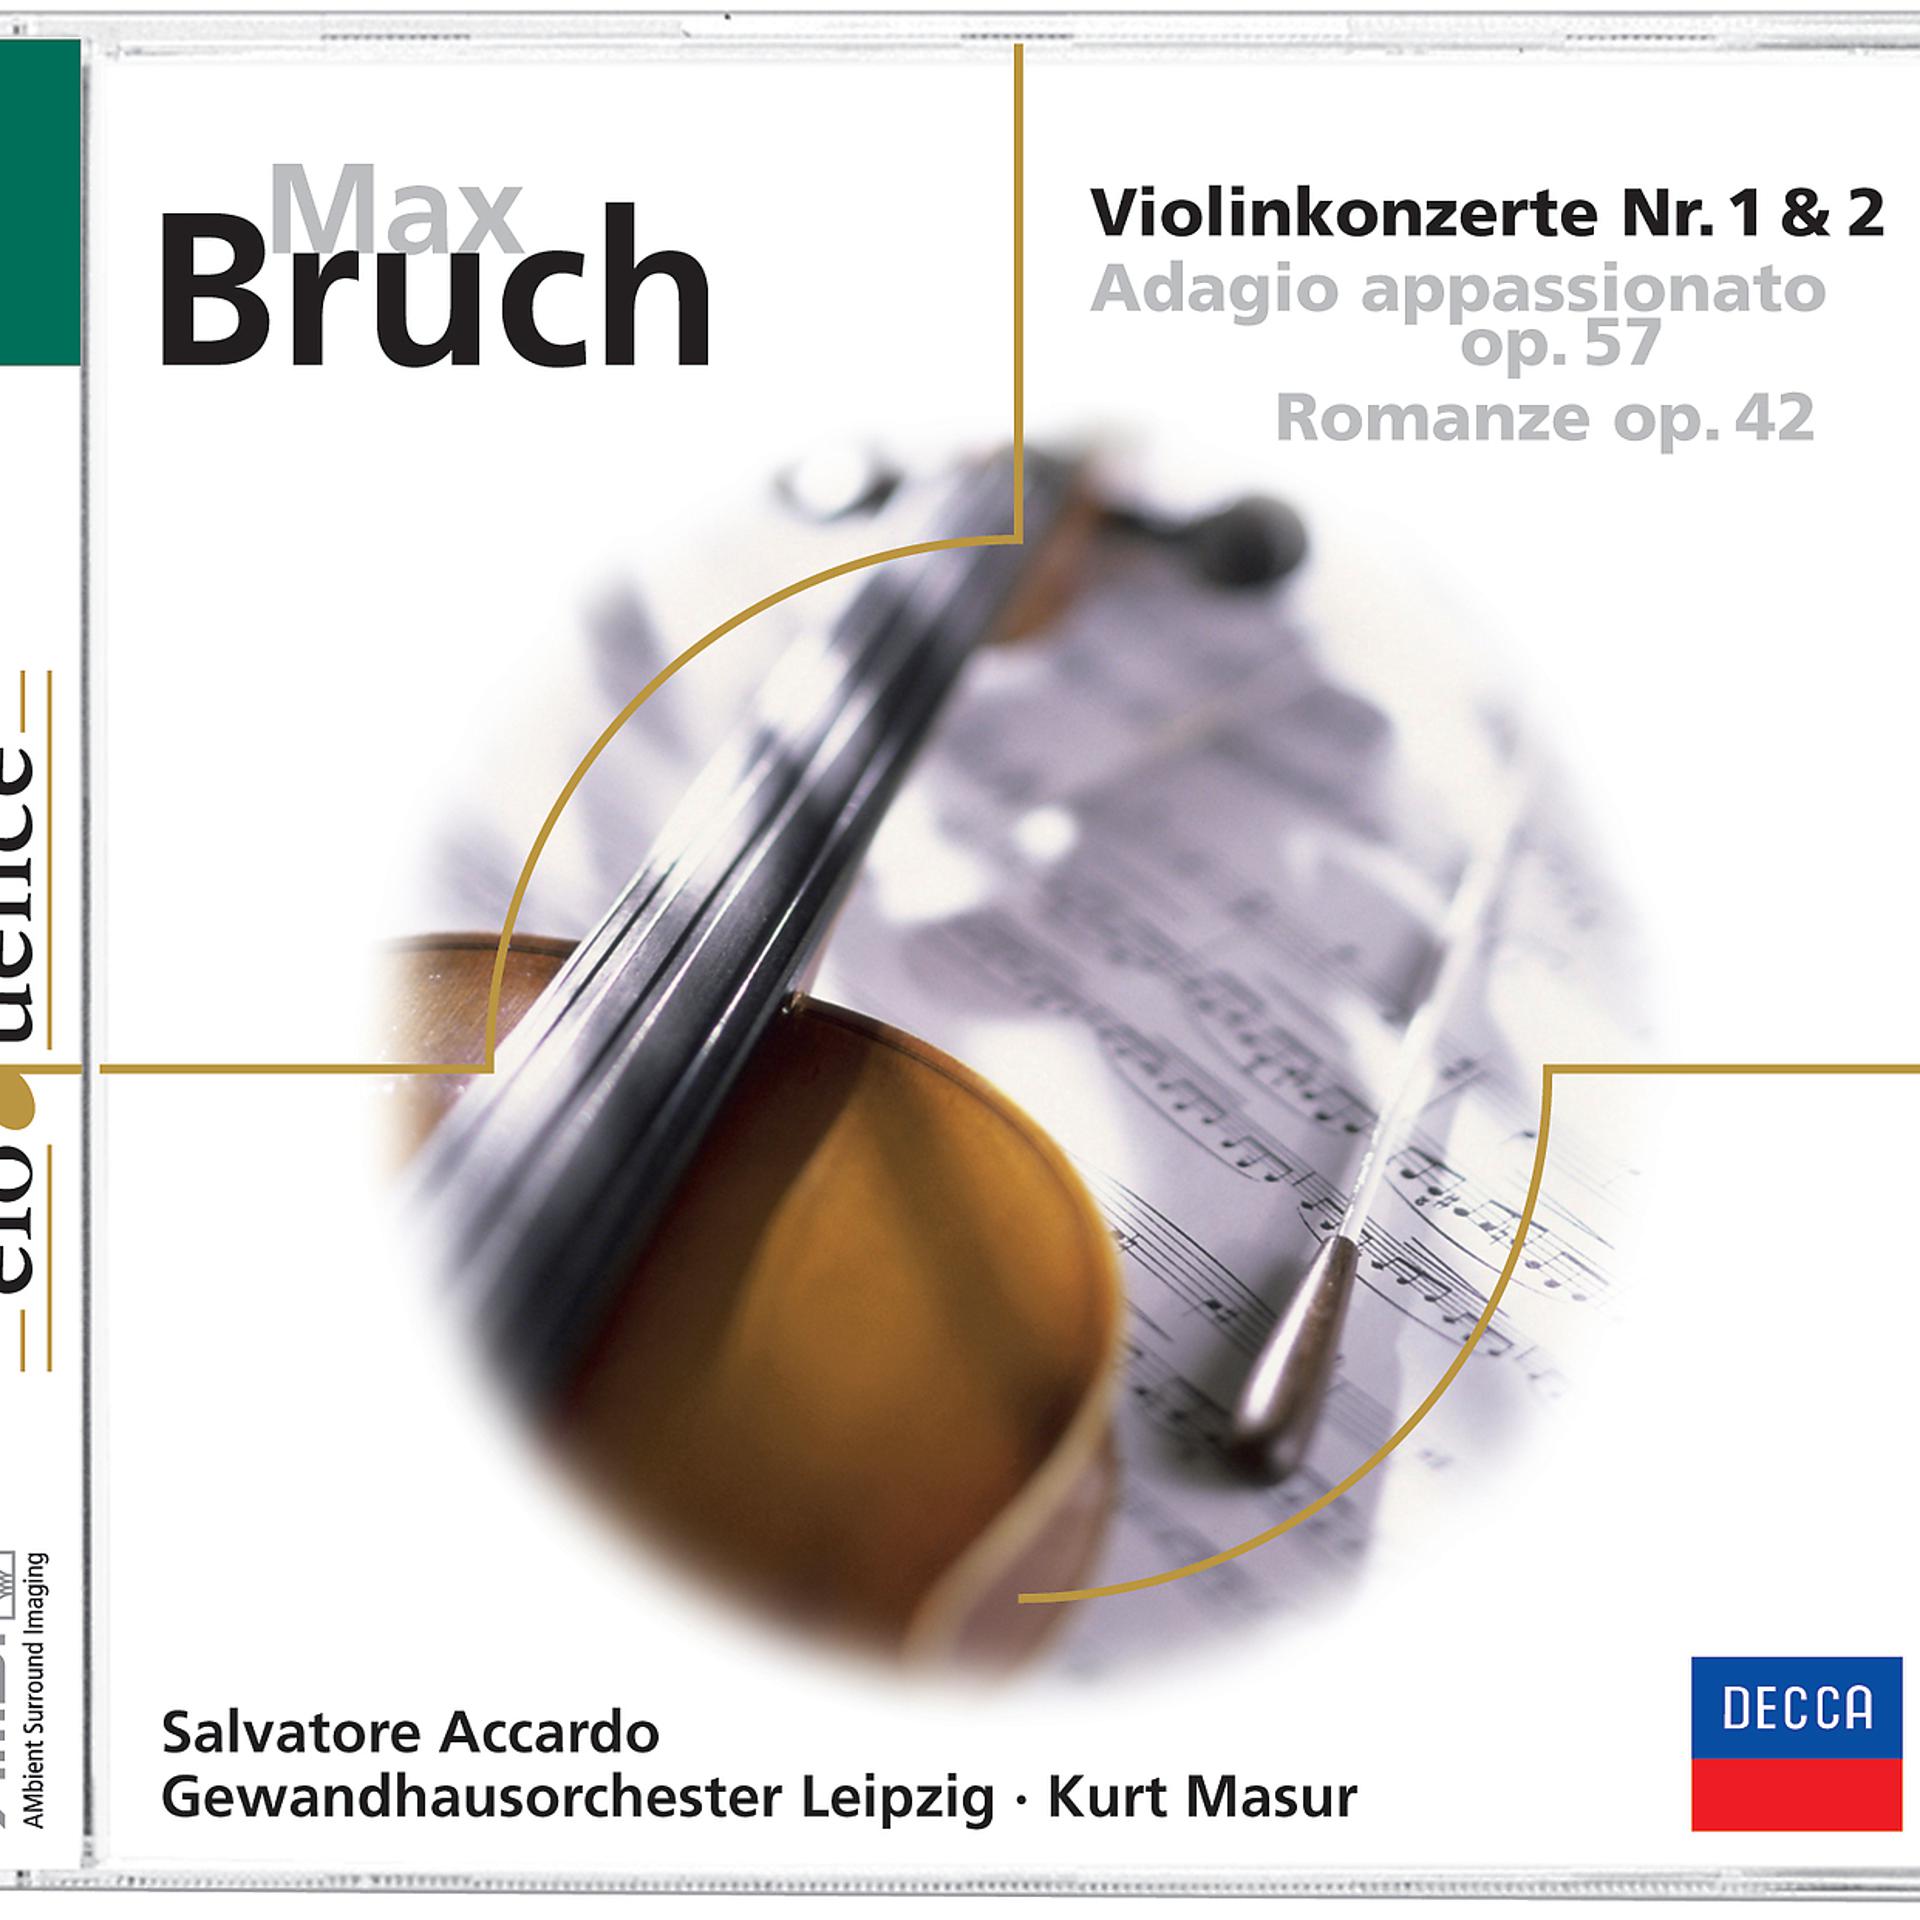 Max Bruch - complete works for Violin and Orchestra (Masur; Accardo). Violin Adagios 2cd. Liszt - Orchestral works (Kurt Masur)(7cd).